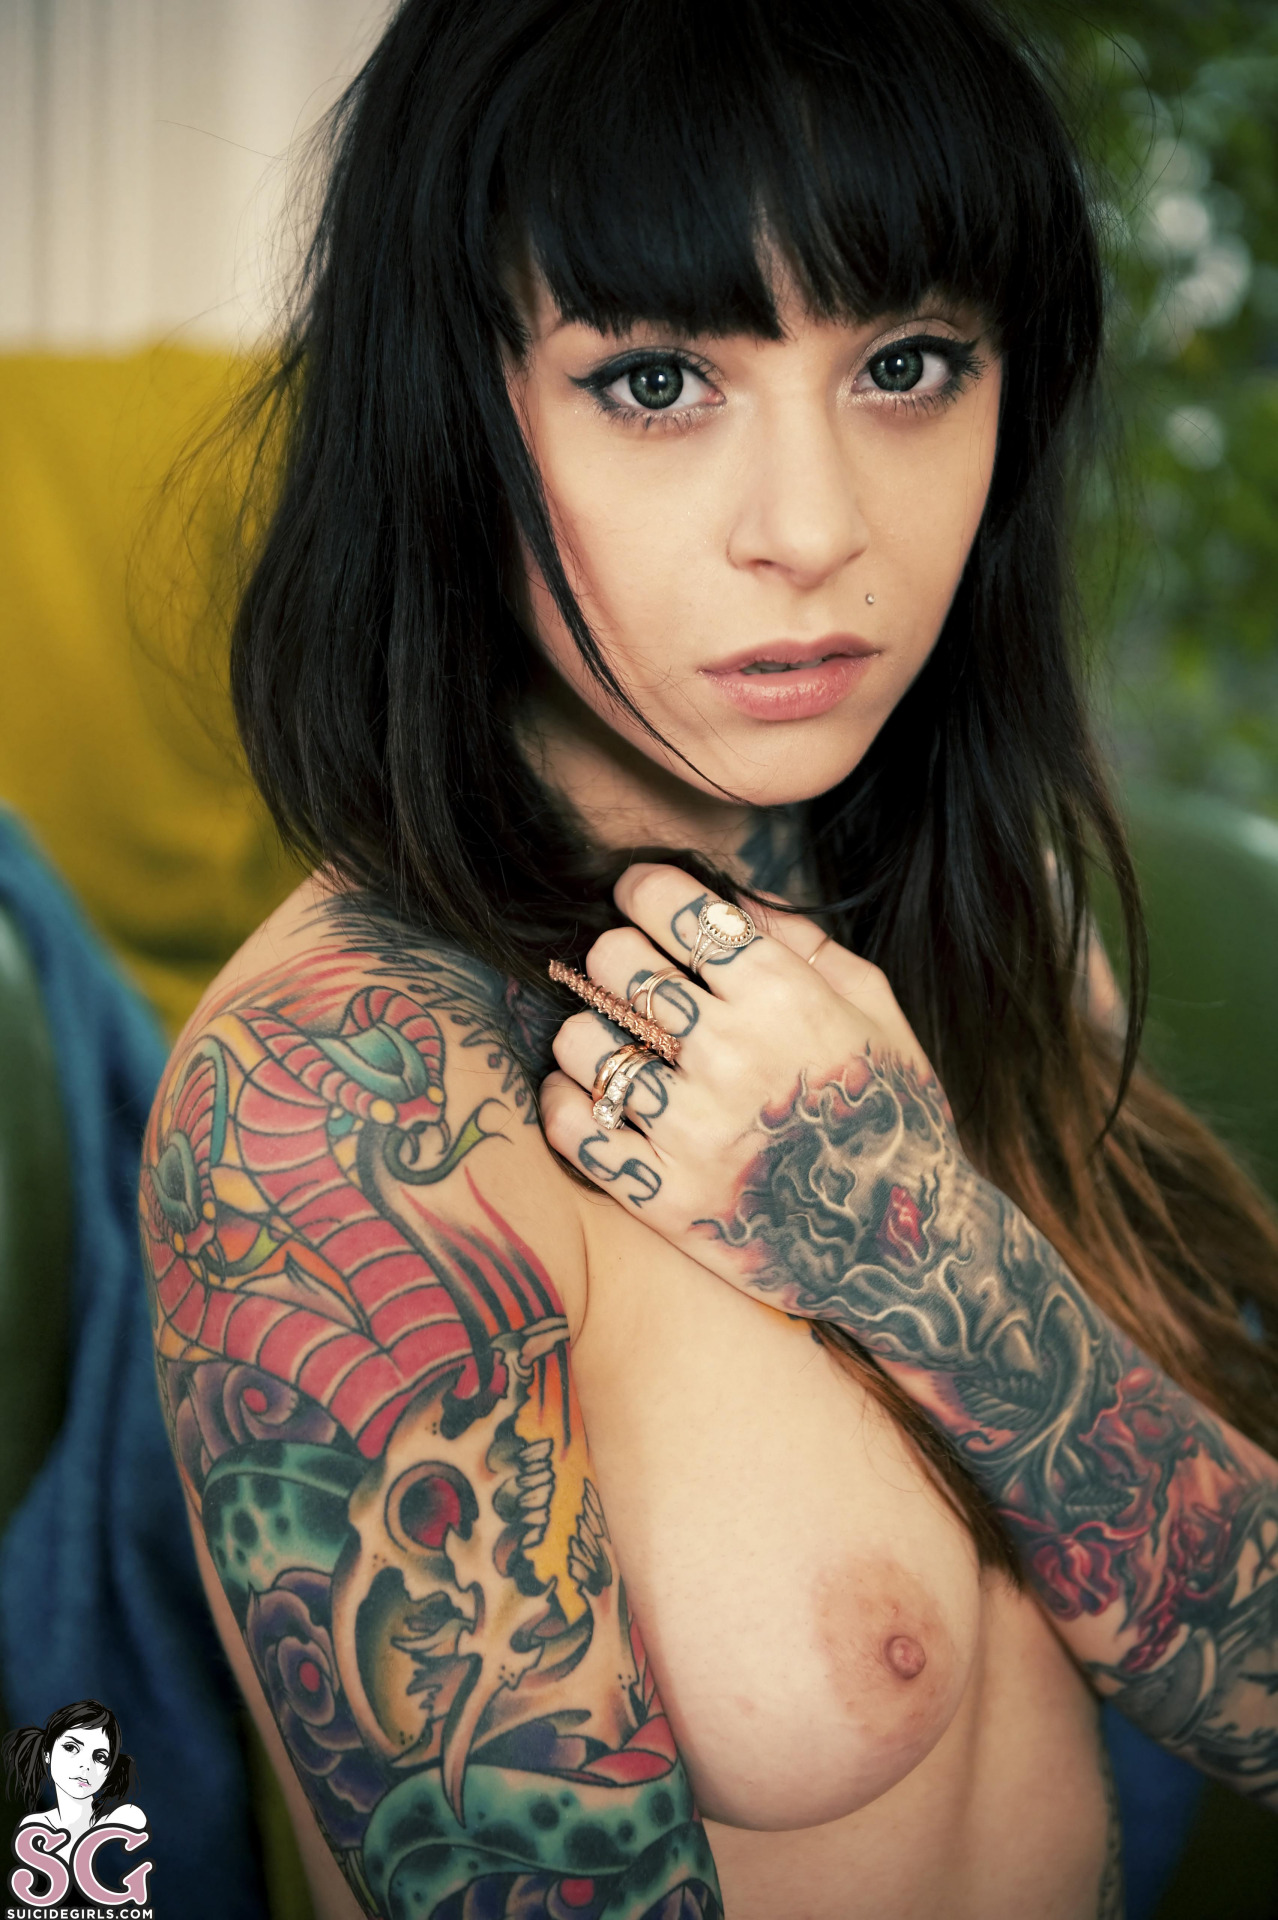 suicide-girls-naked-tattoos-nude-mix-vol9-18